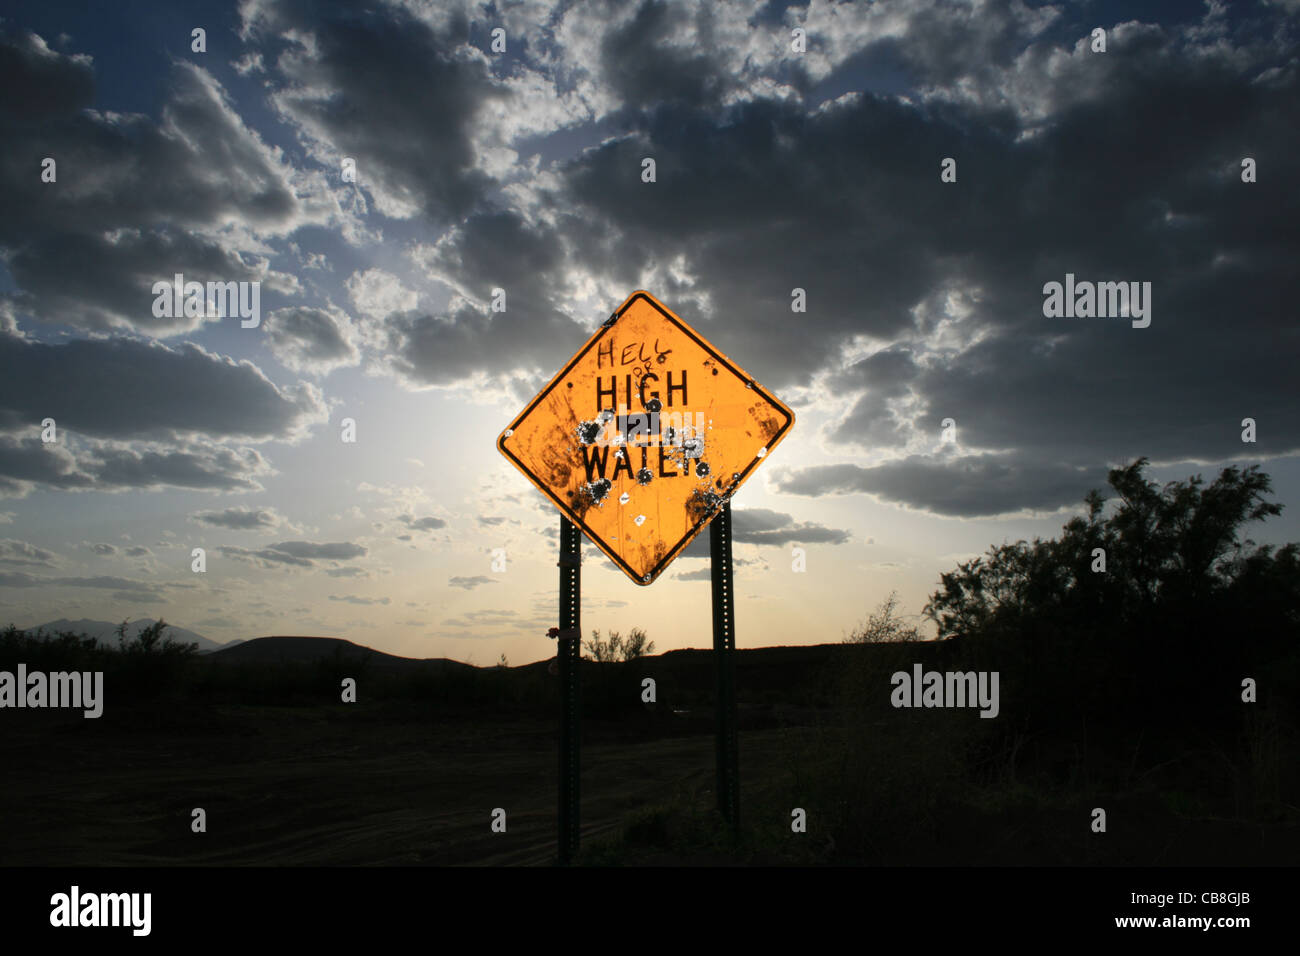 high water road sign shot and altered to read hell or high water Stock Photo